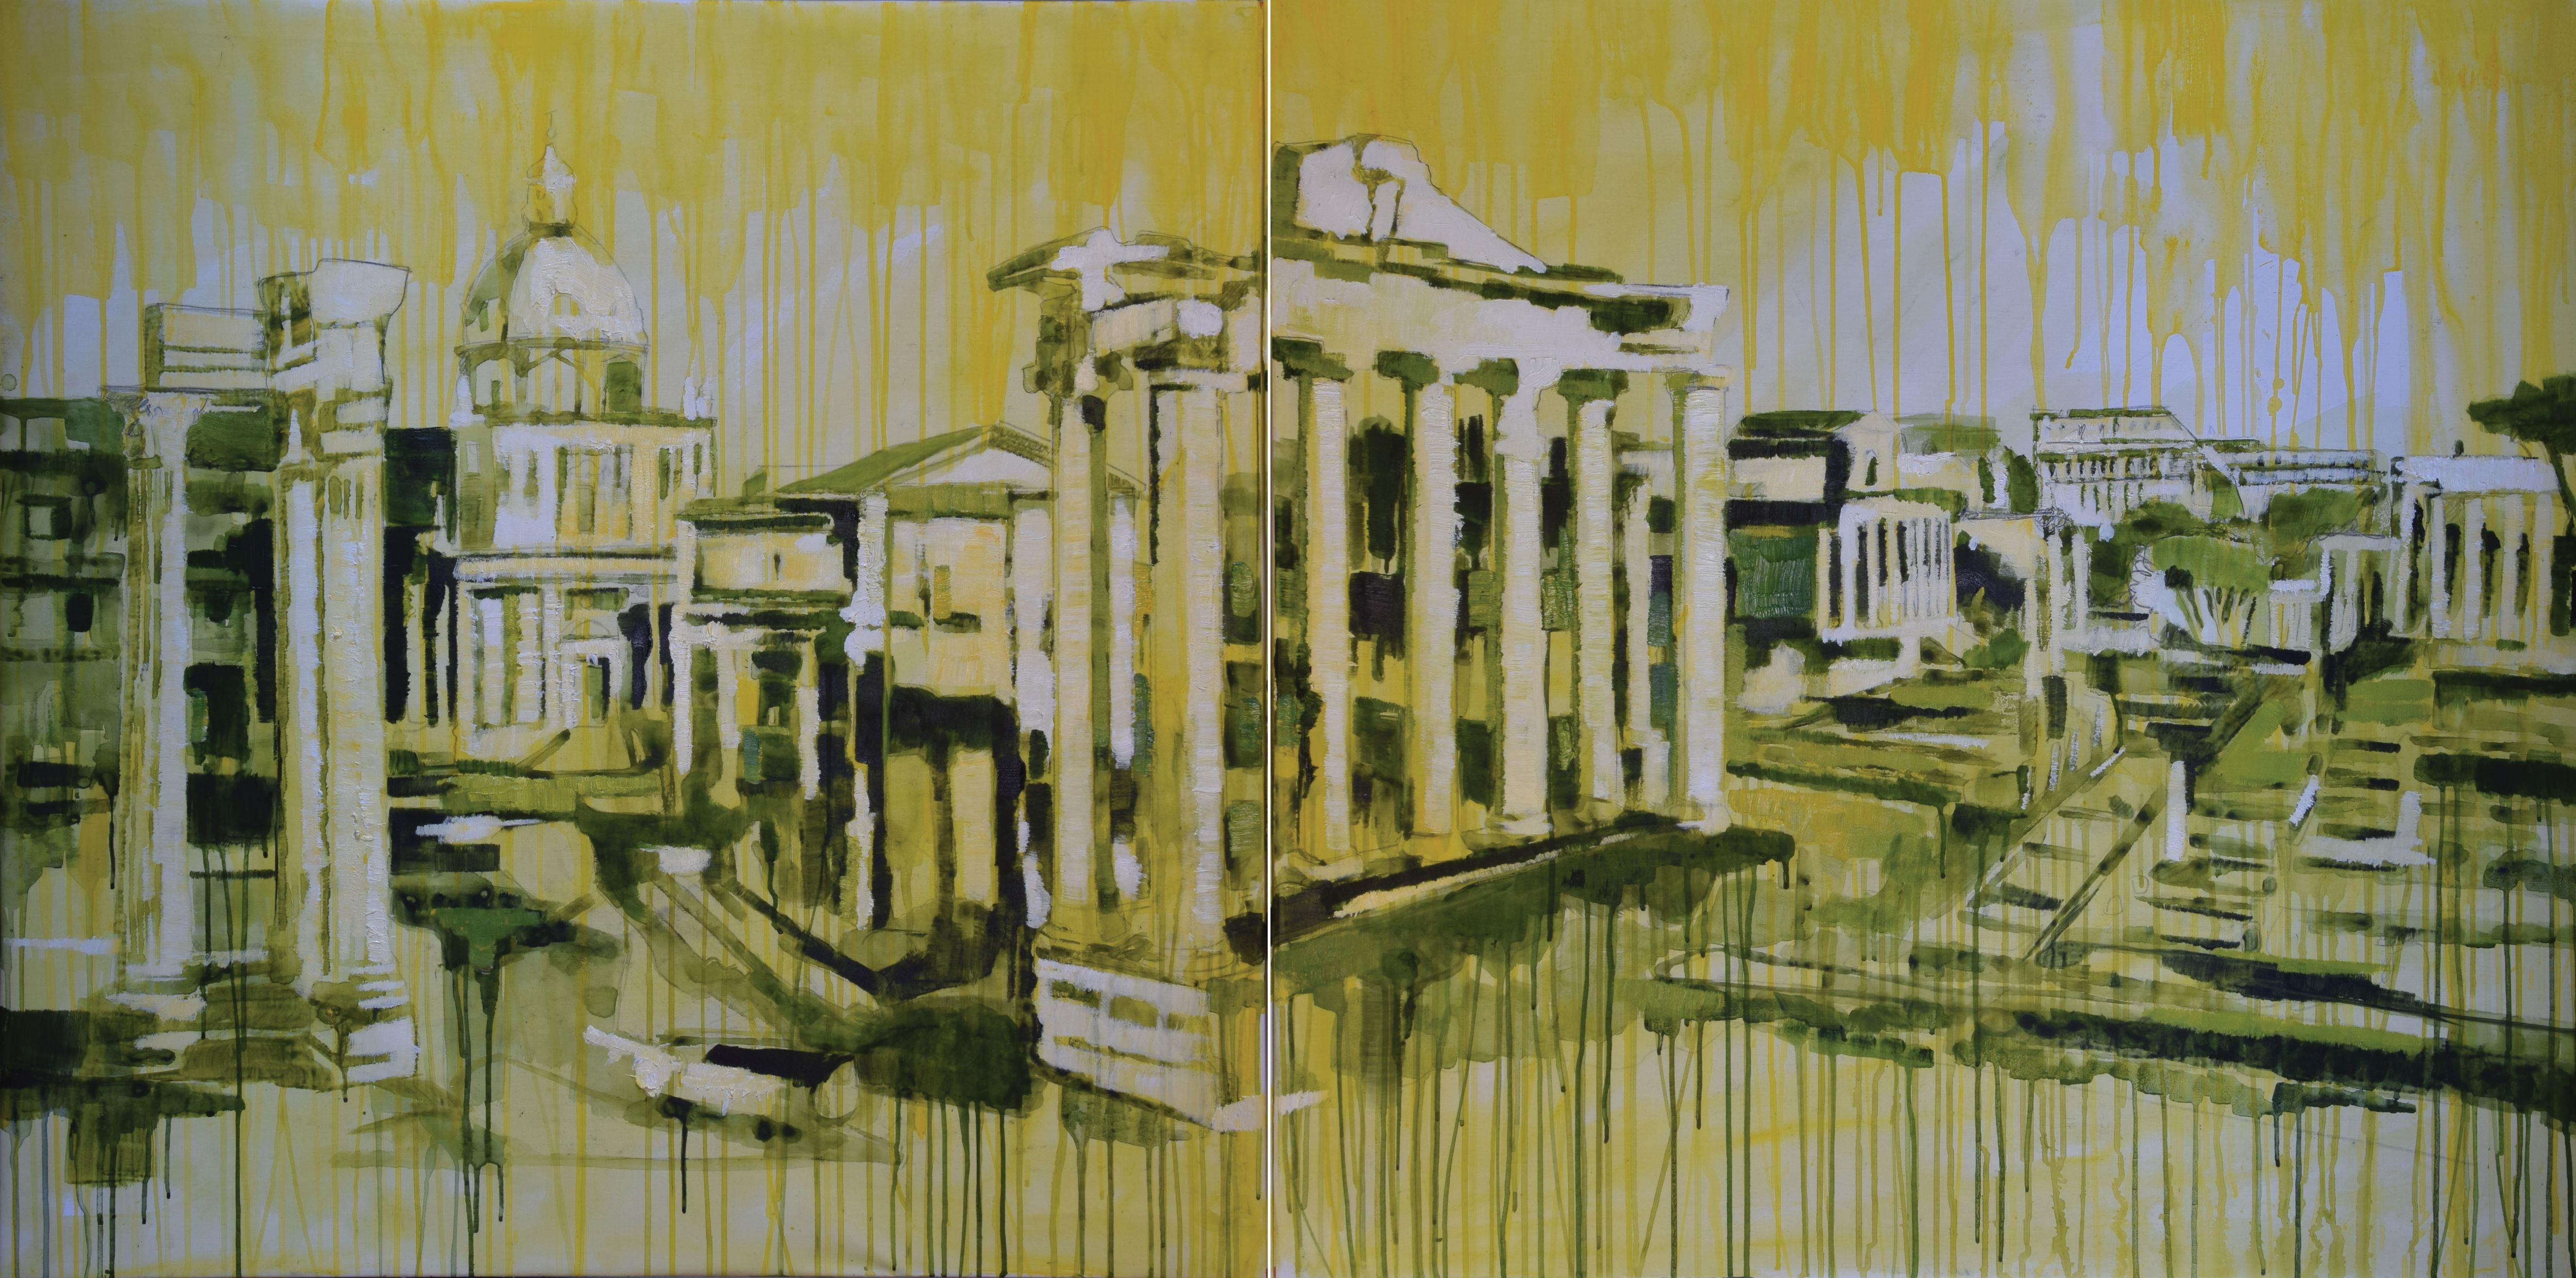 About the painting:
An image of the Imperial Forums of Rome, the ancient city near the Colosseum, Piazza Venezia, Trajan's Markets.
The yellow sky slides over everything, the light transforms matter.

P.S. it is a work divided into two canvases